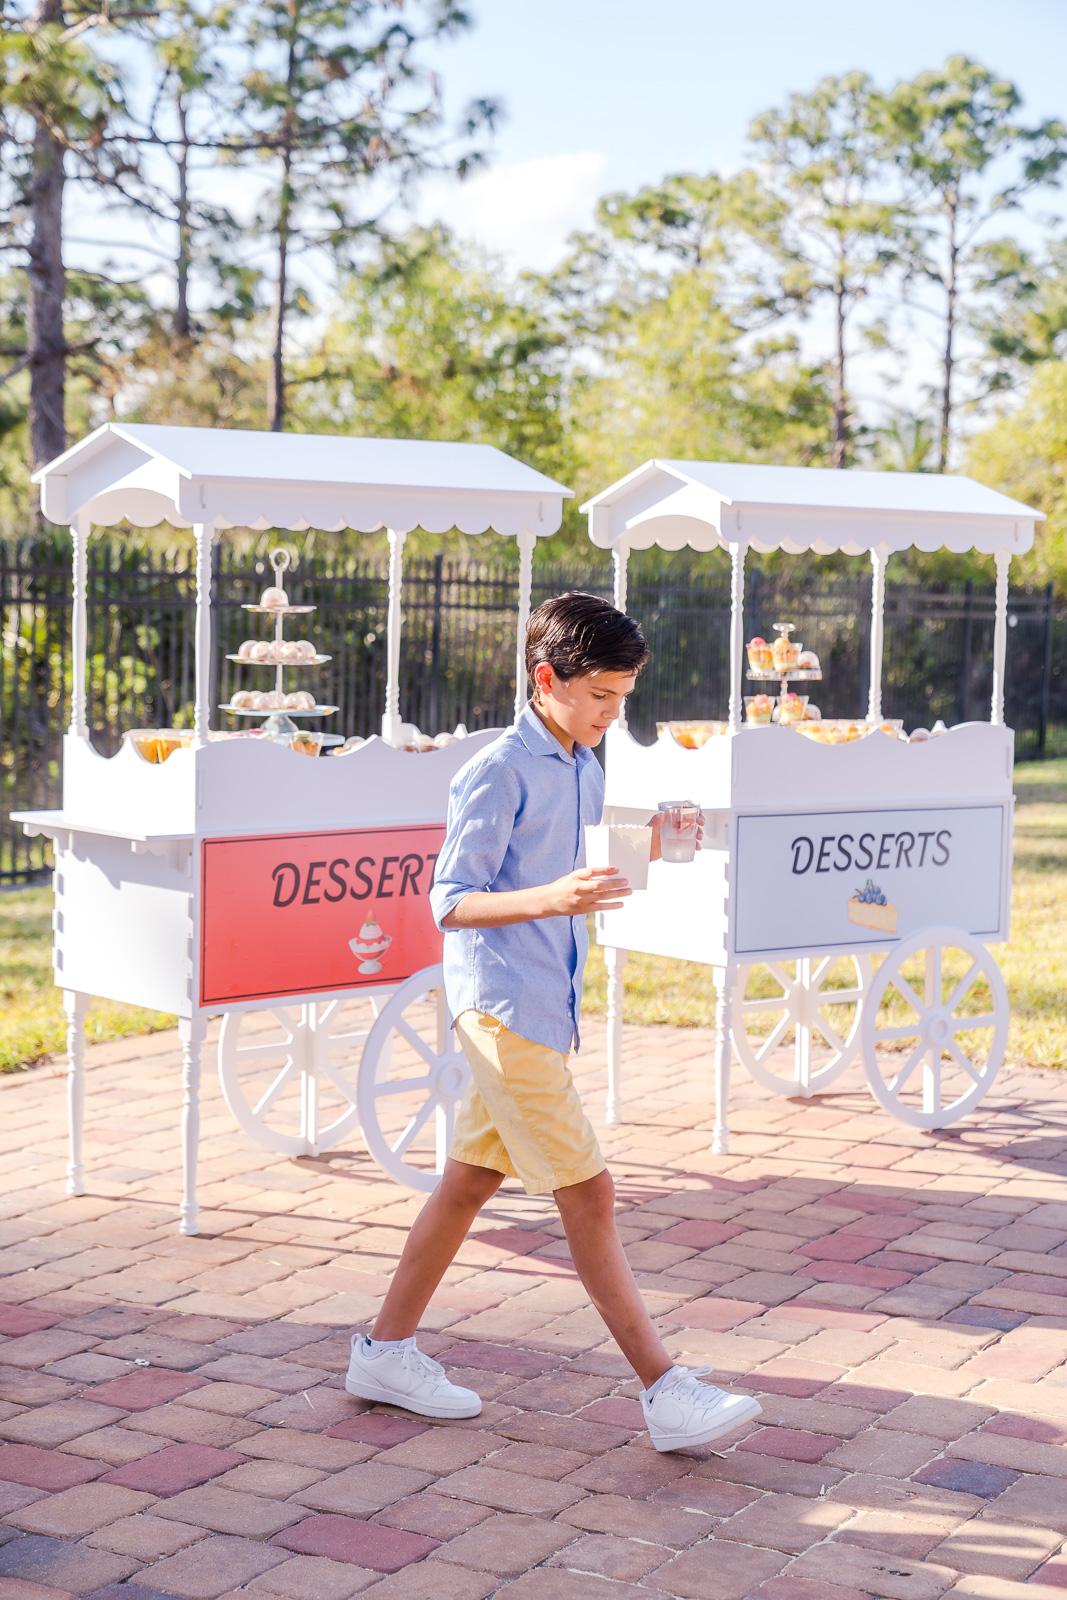 Food carts at a kids birthday party in Orlando captured by top event photographer and videographer